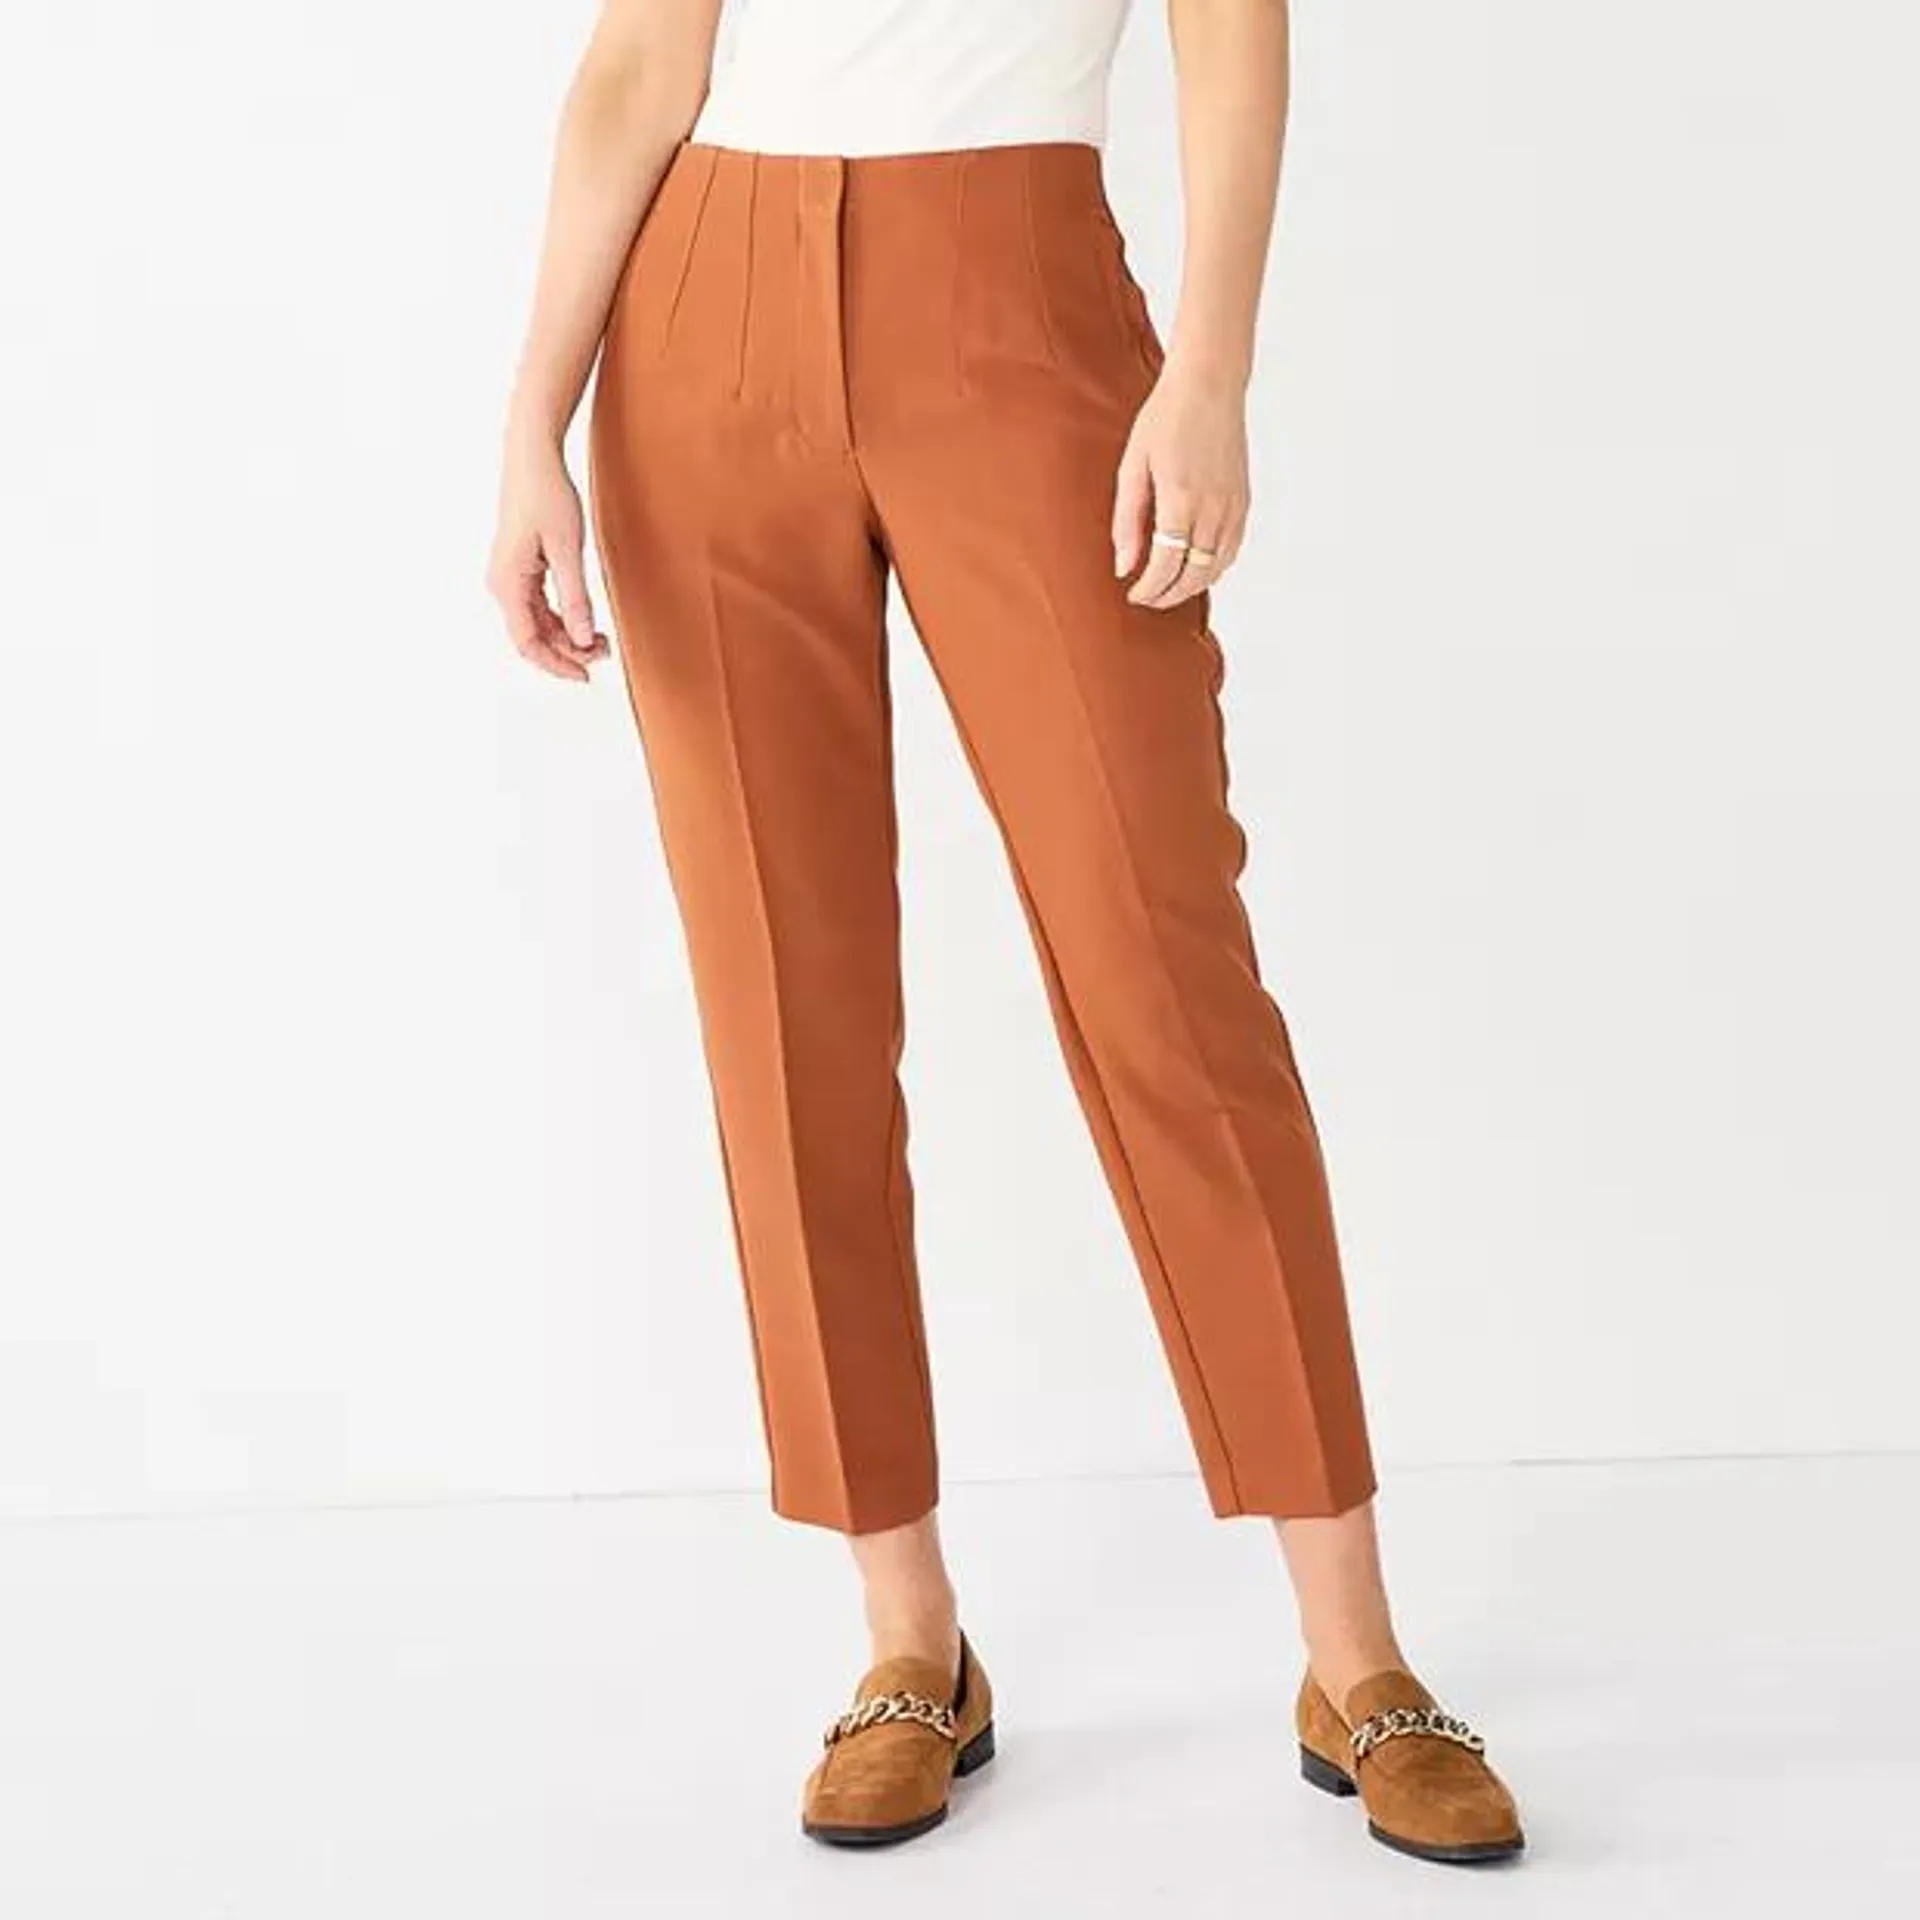 Women's Nine West High-Waisted Tapered Pants